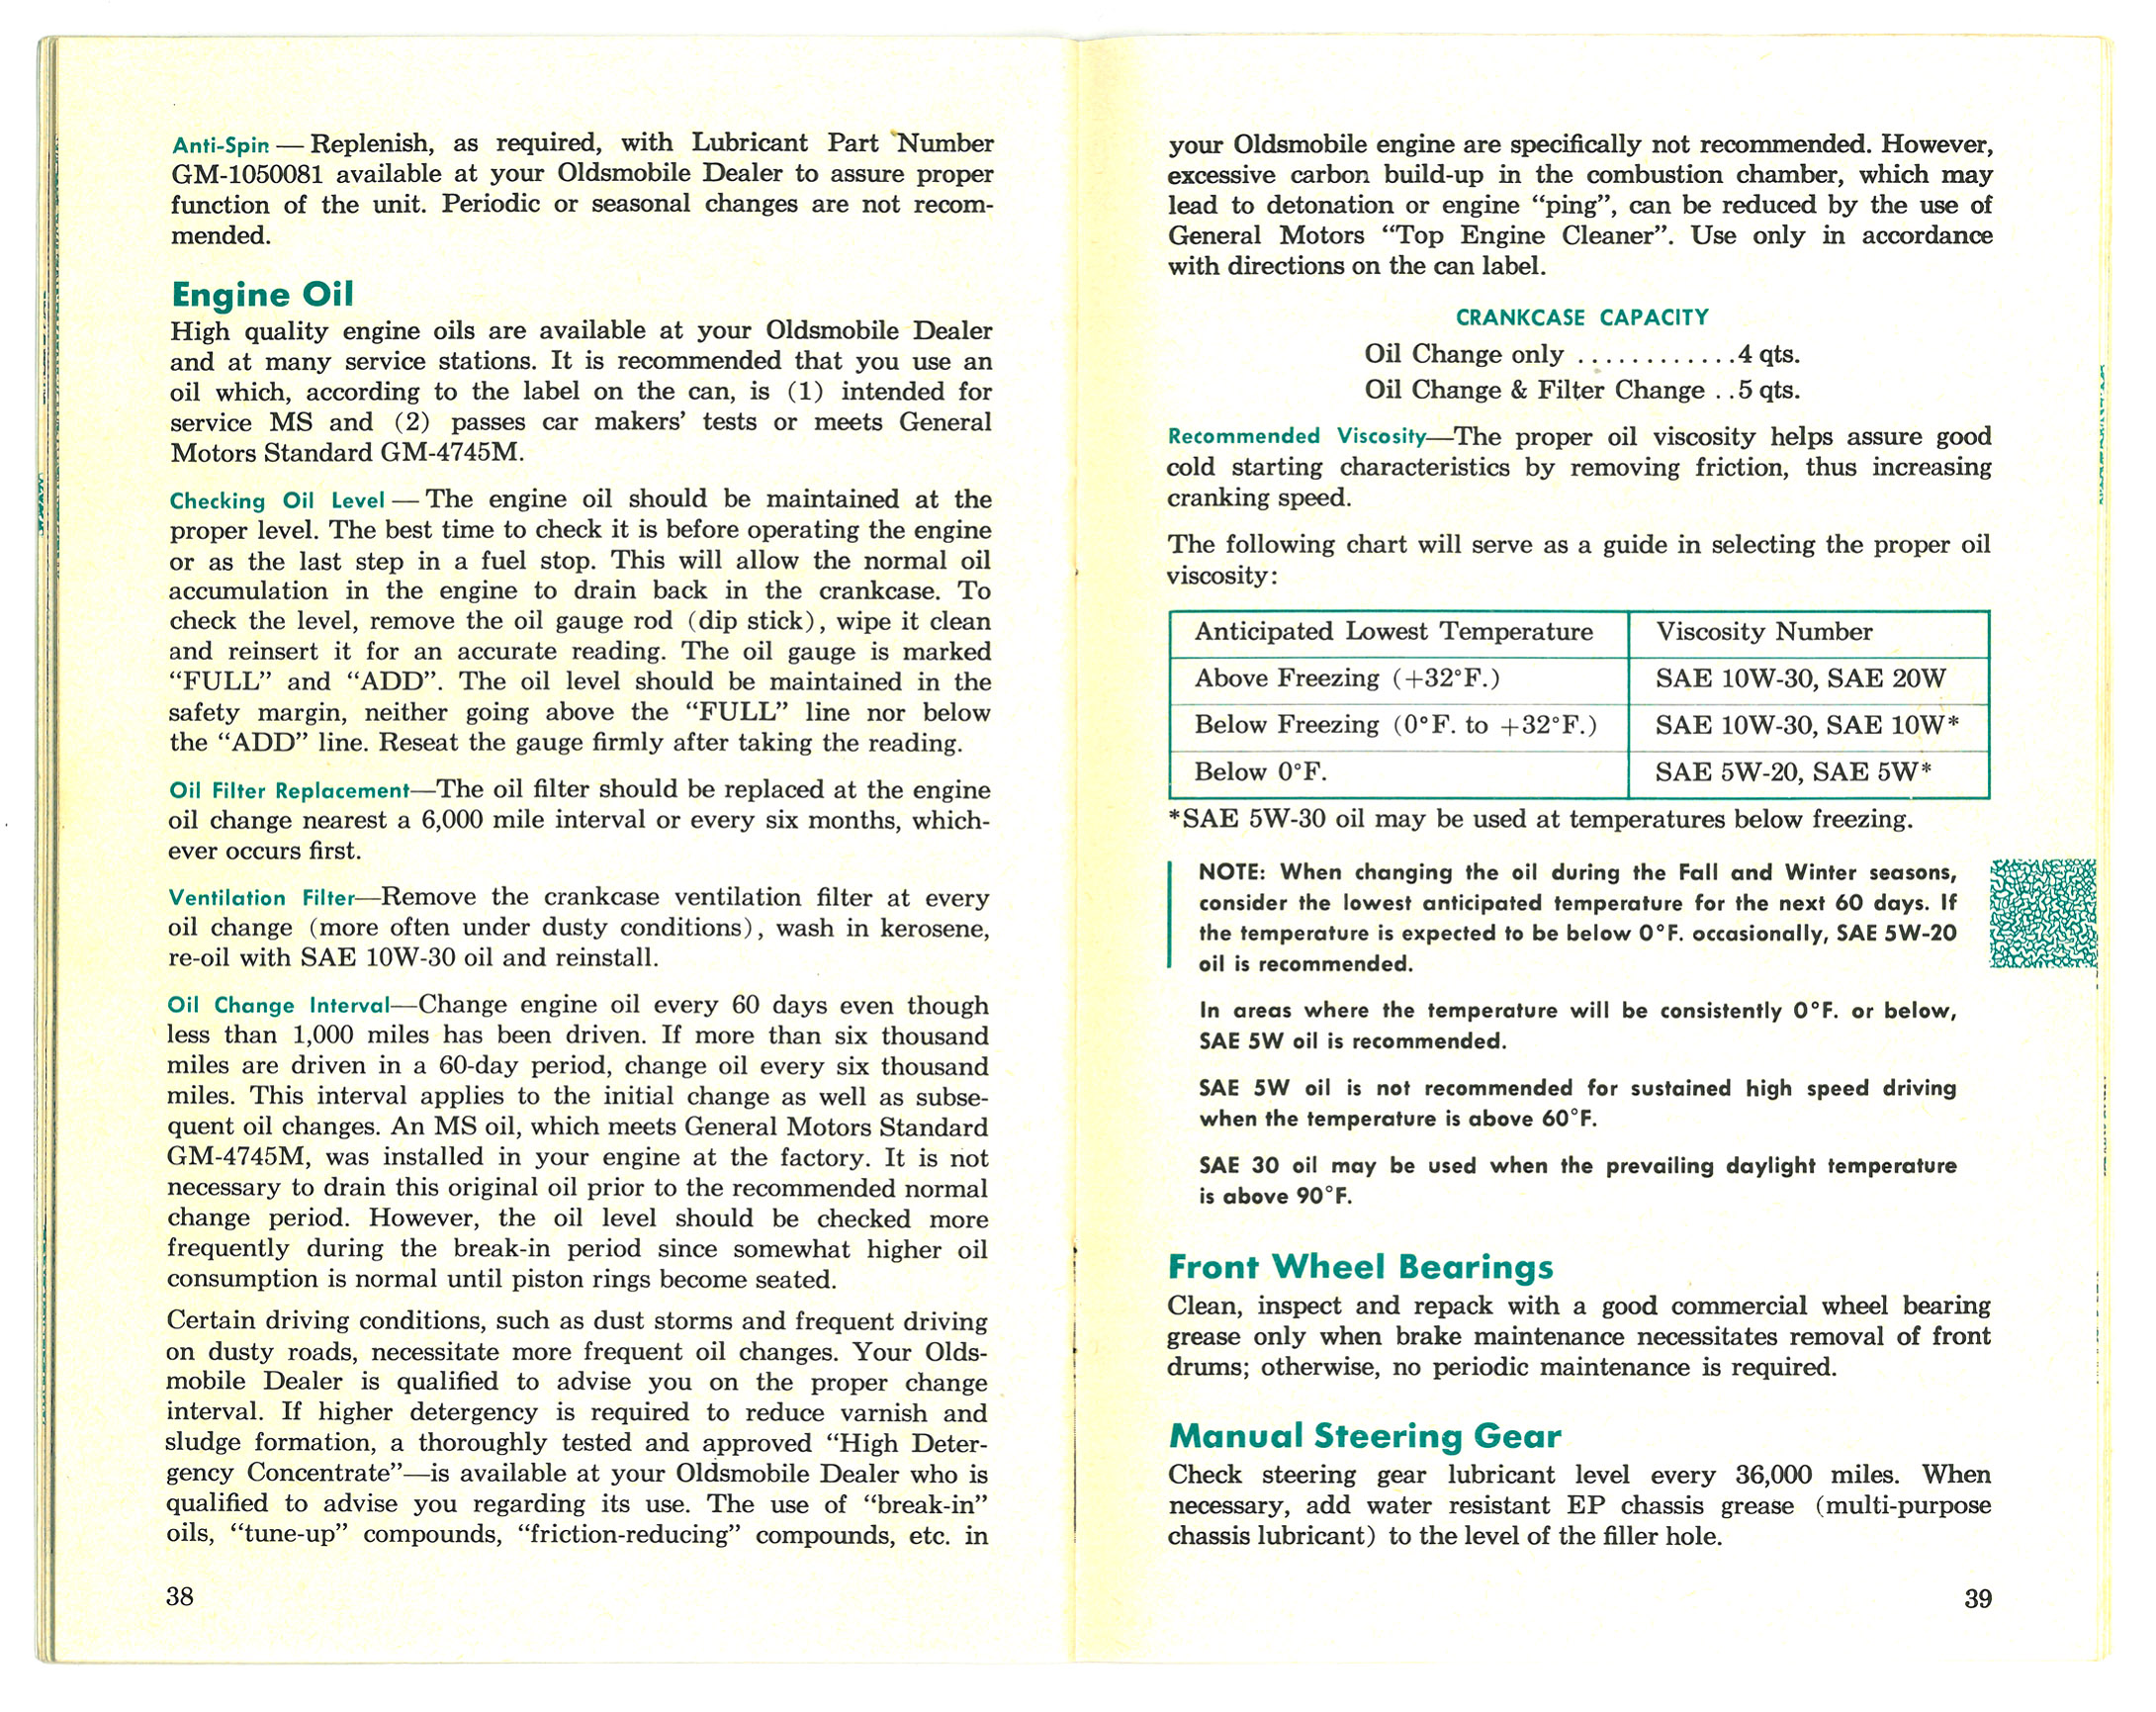 1966_Oldsmobile_owner_operating_manual_Page_21